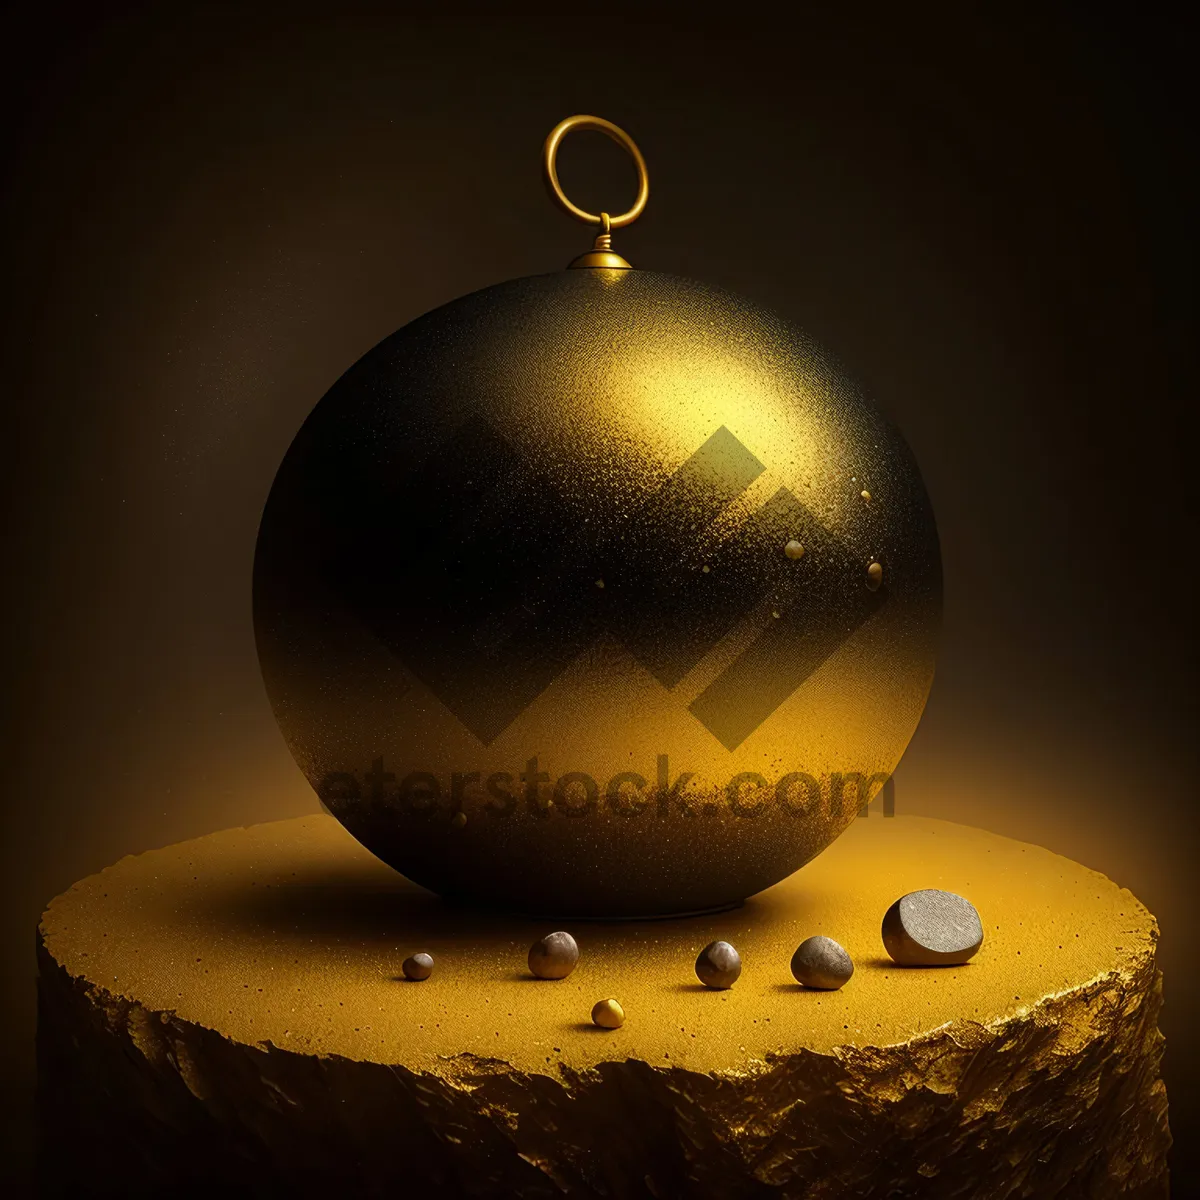 Picture of Festive Golden Bauble: Traditional Holiday Decoration